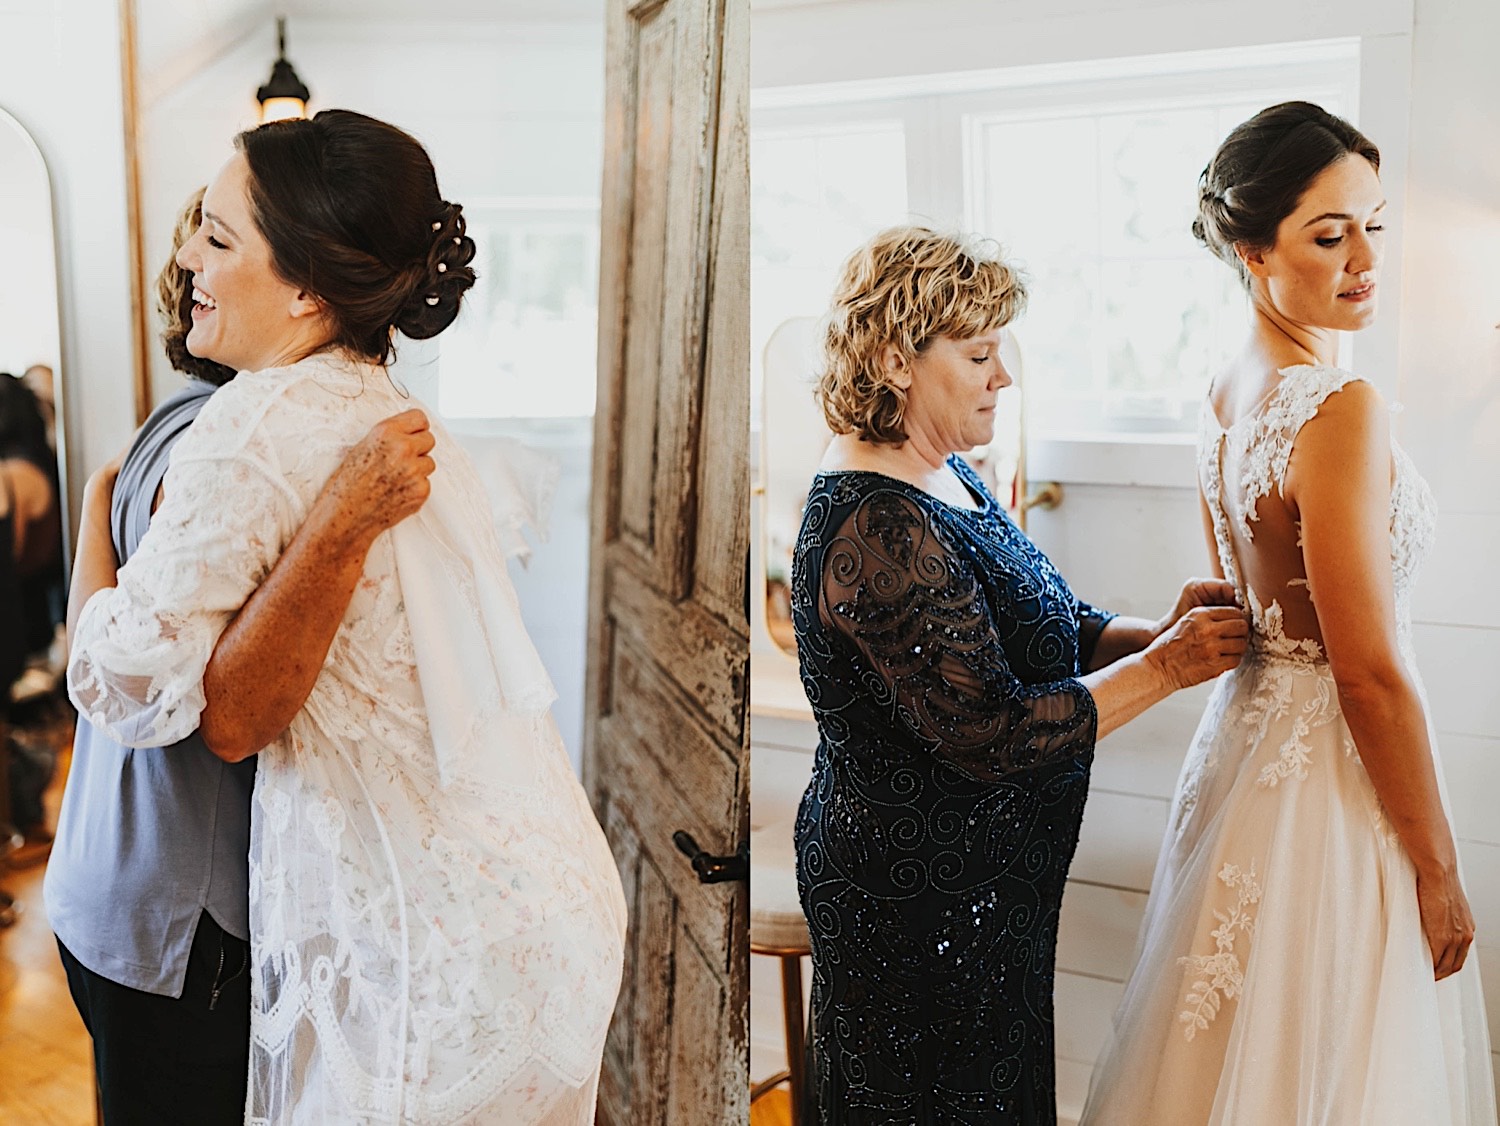 2 photos side by side, the left is of a bride hugging her mother and smiling before putting on her wedding dress, the right is of the mother buttoning up the back of the bride's wedding dress